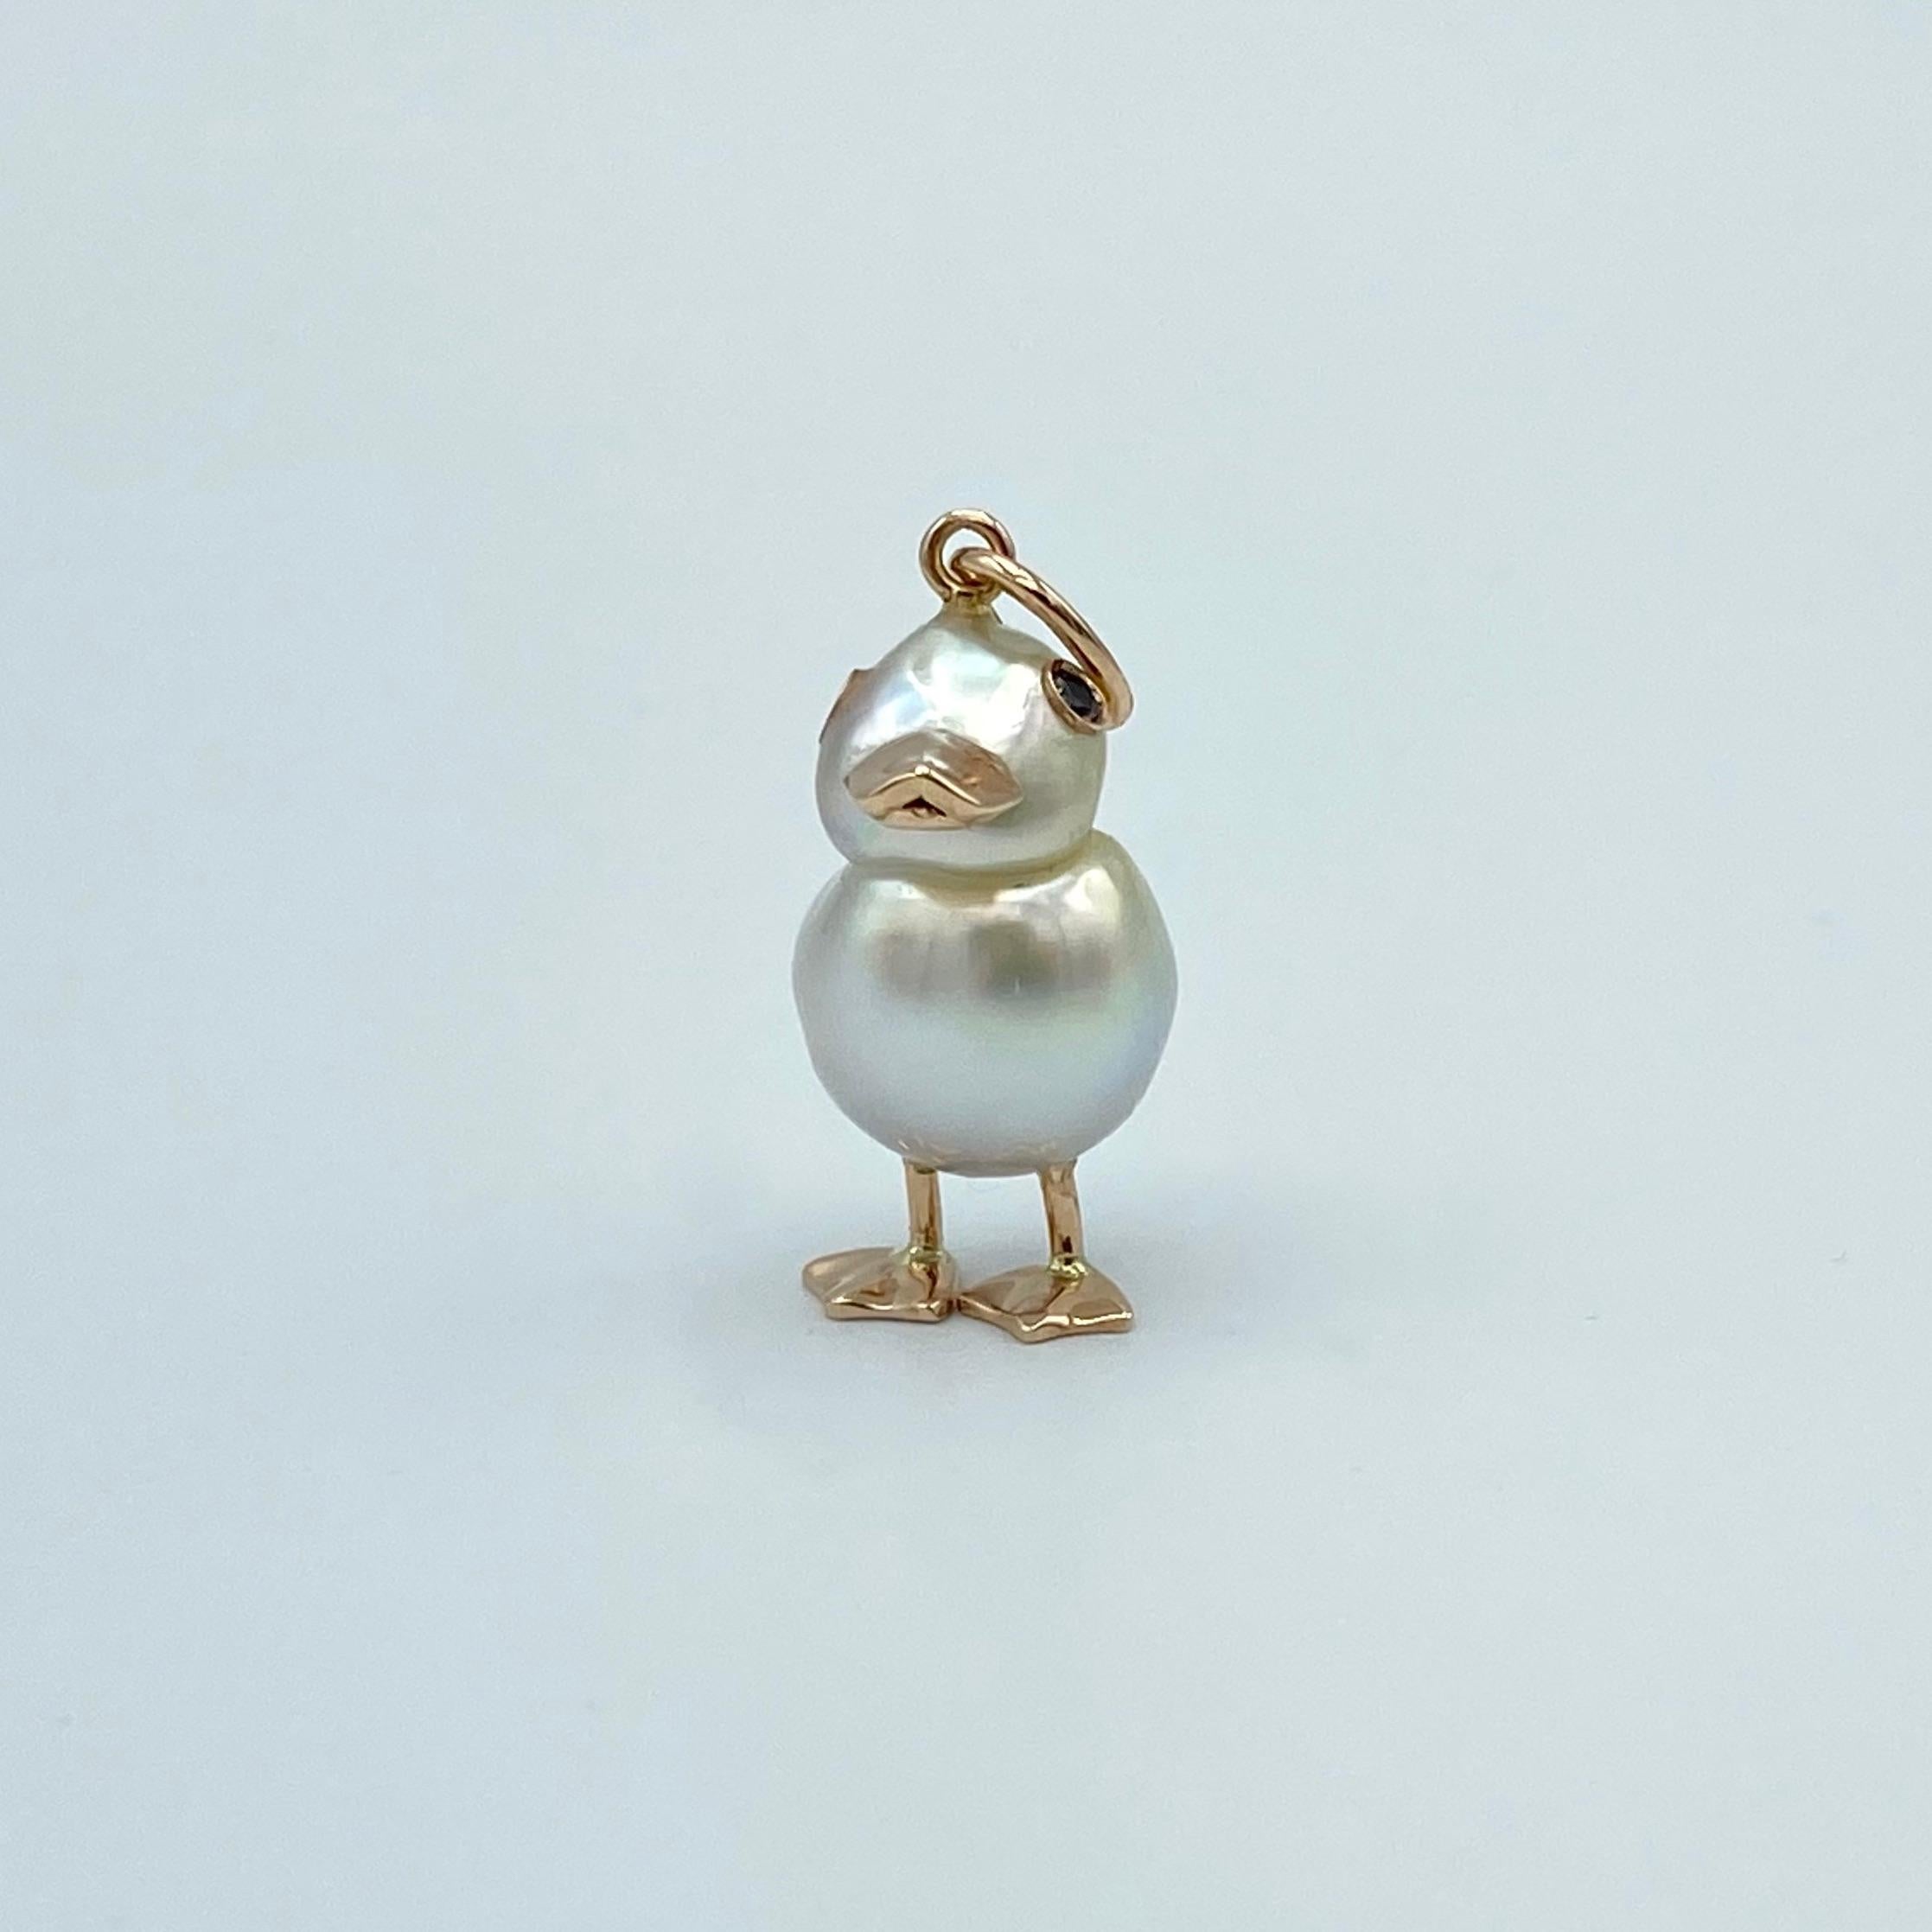 I made a duck jewel with this wonderful and original shape Australian pearl of about 11x15 mm.
He's got a beak and legs in red gold.
Its eyes are two black diamonds of 0.03.

The height of the pendant including the ring for the chain.
The chain is